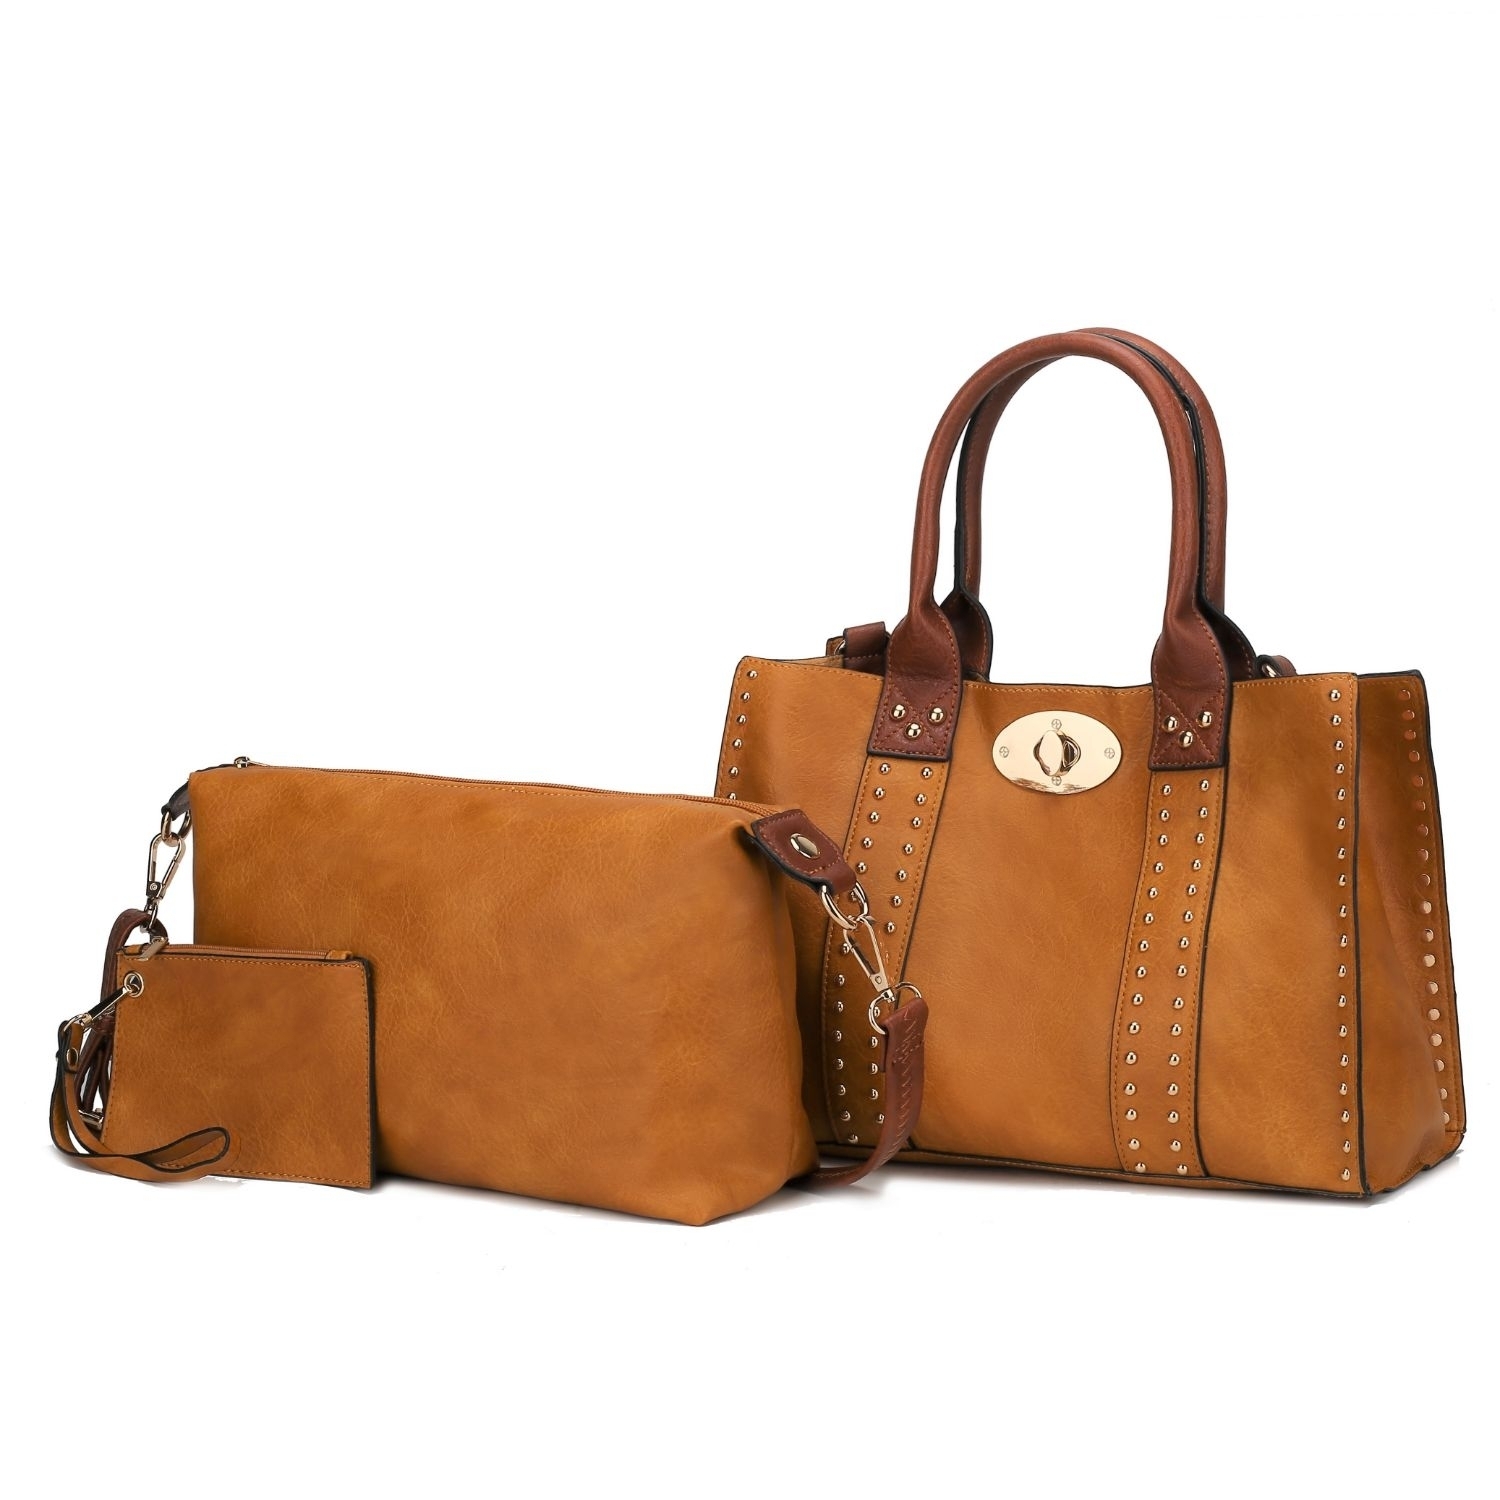 MKF Collection Elissa 3 Pc Set Satchel Handbag With Pouch & Coin Purse By Mia K. - Mustard-brown